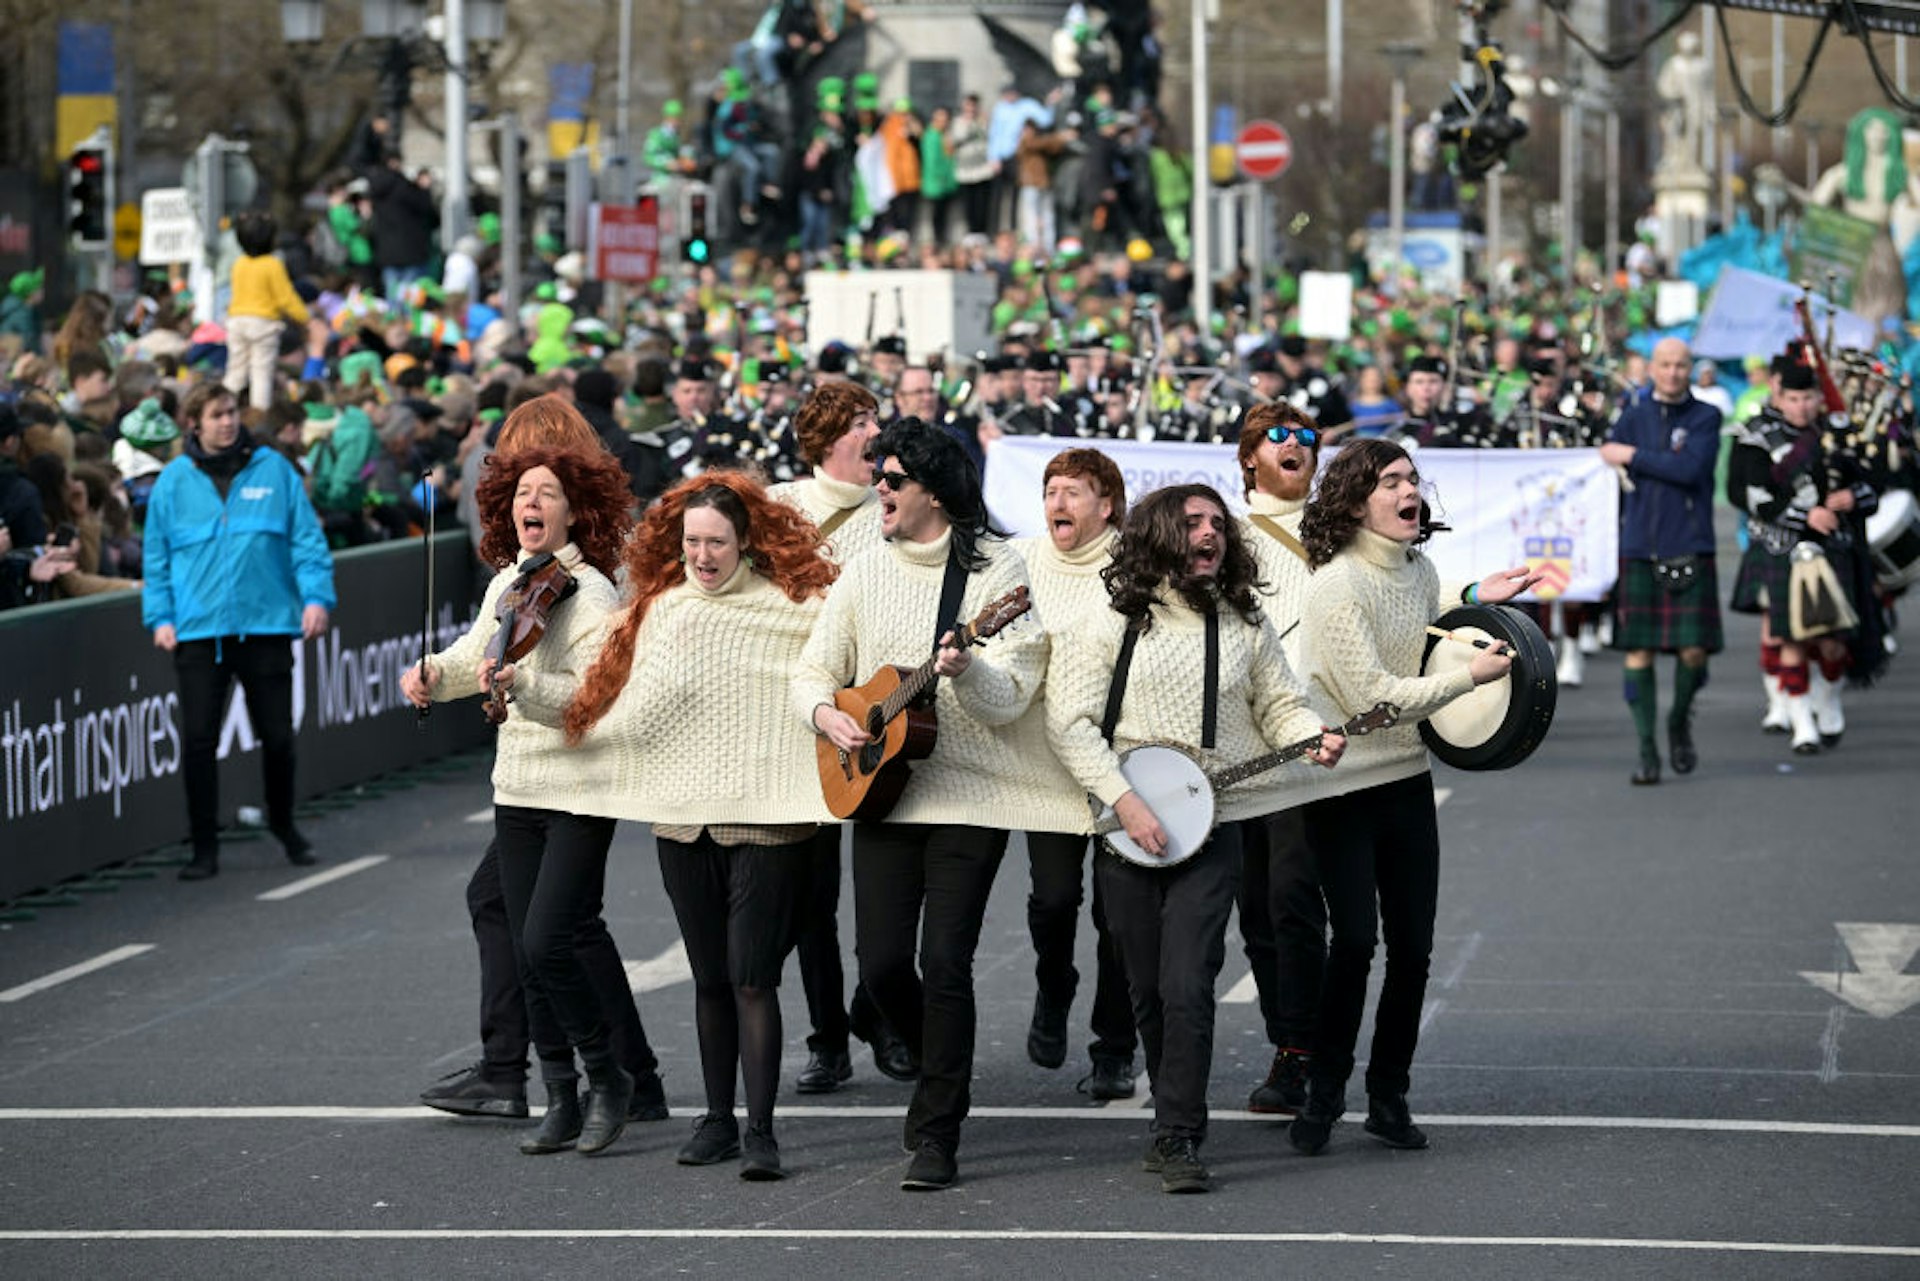 Performers take part in the St Patrick's Day parade